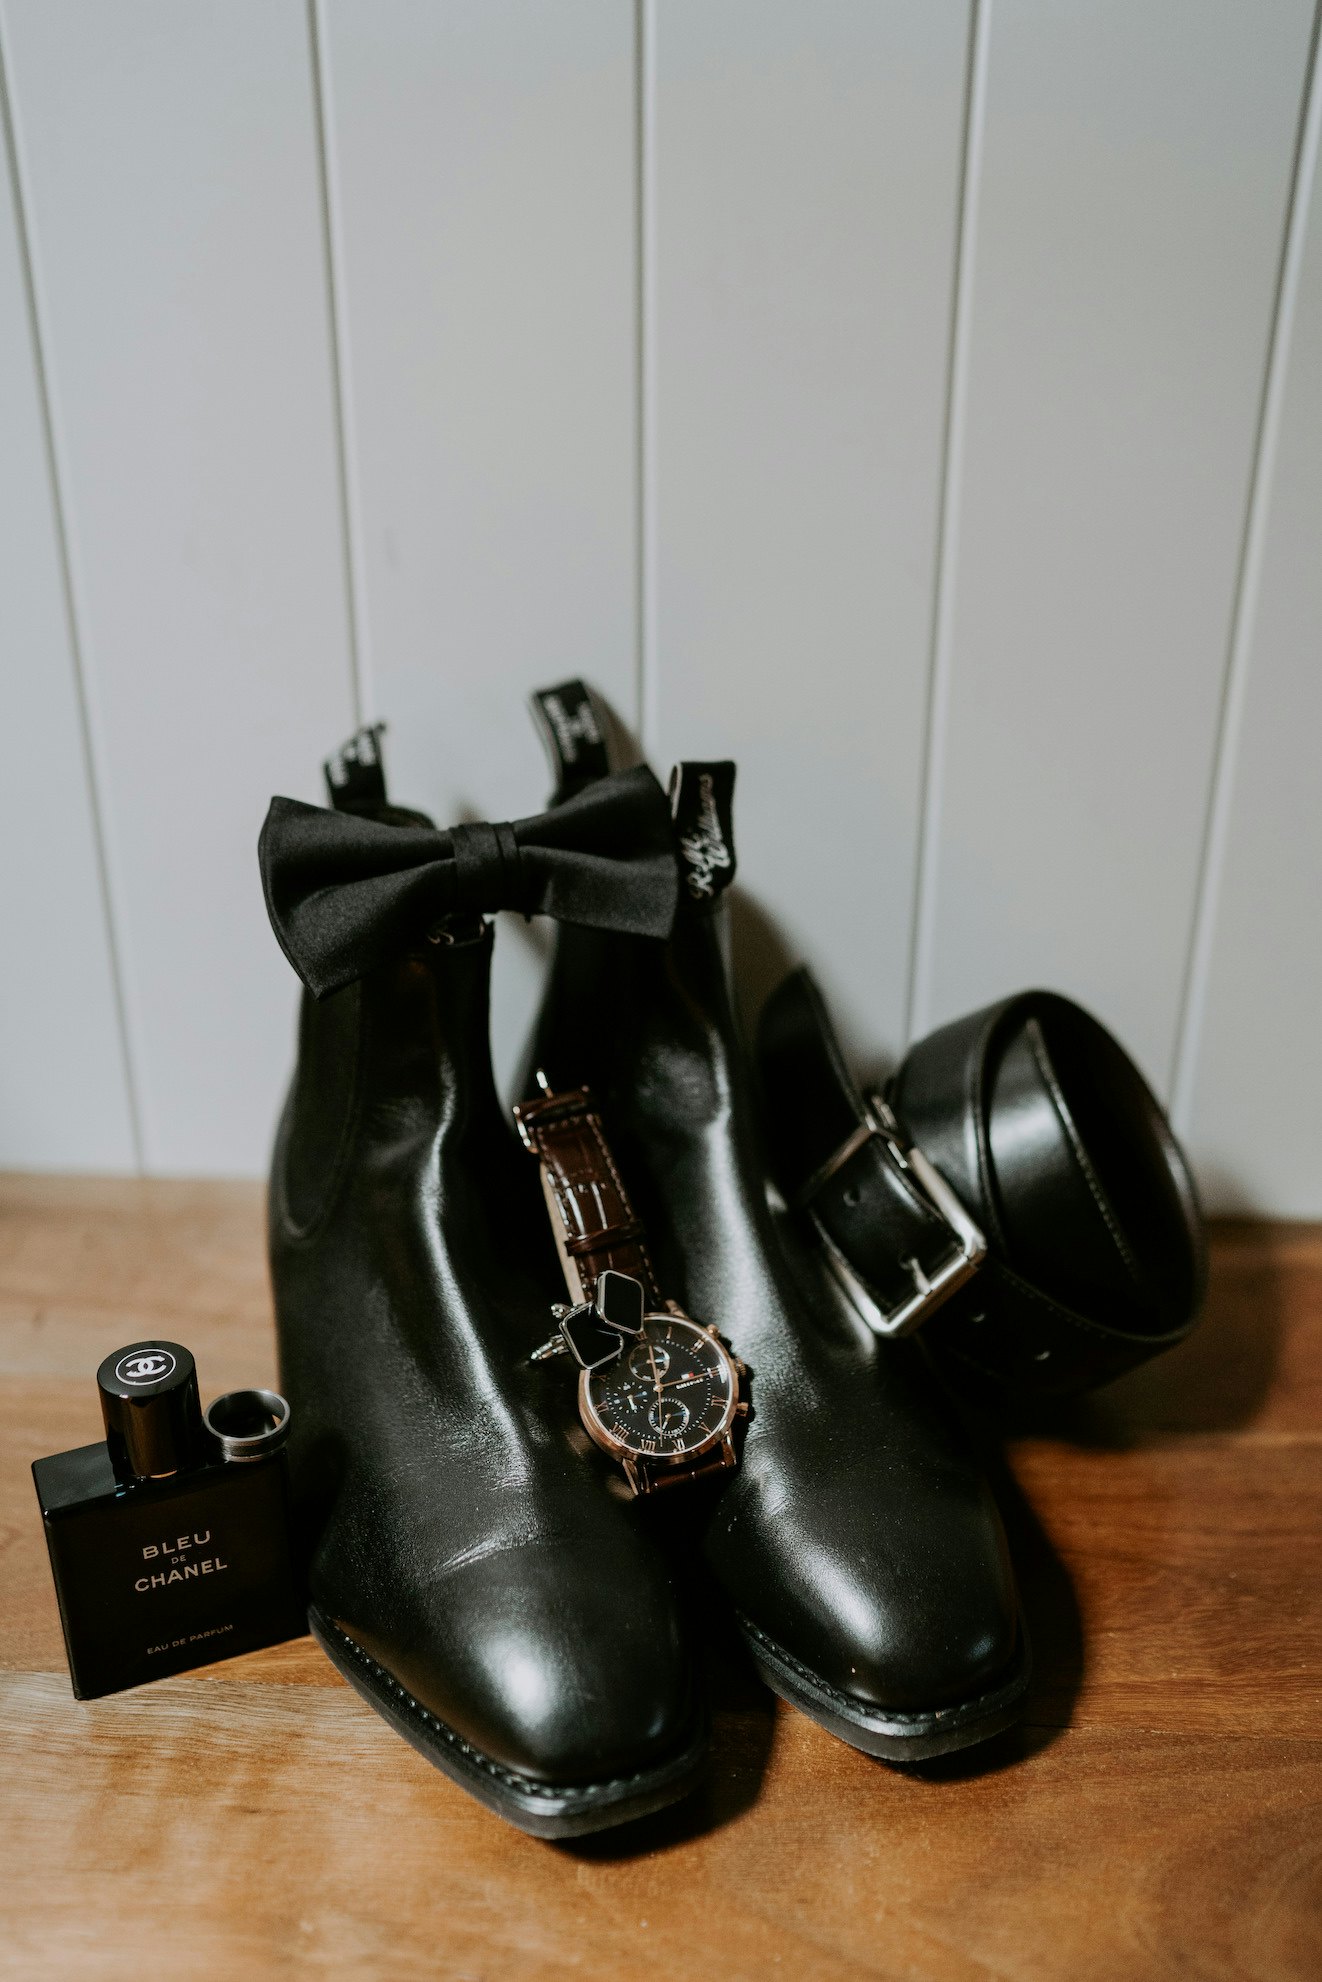 Grooms shoes, watch and belt